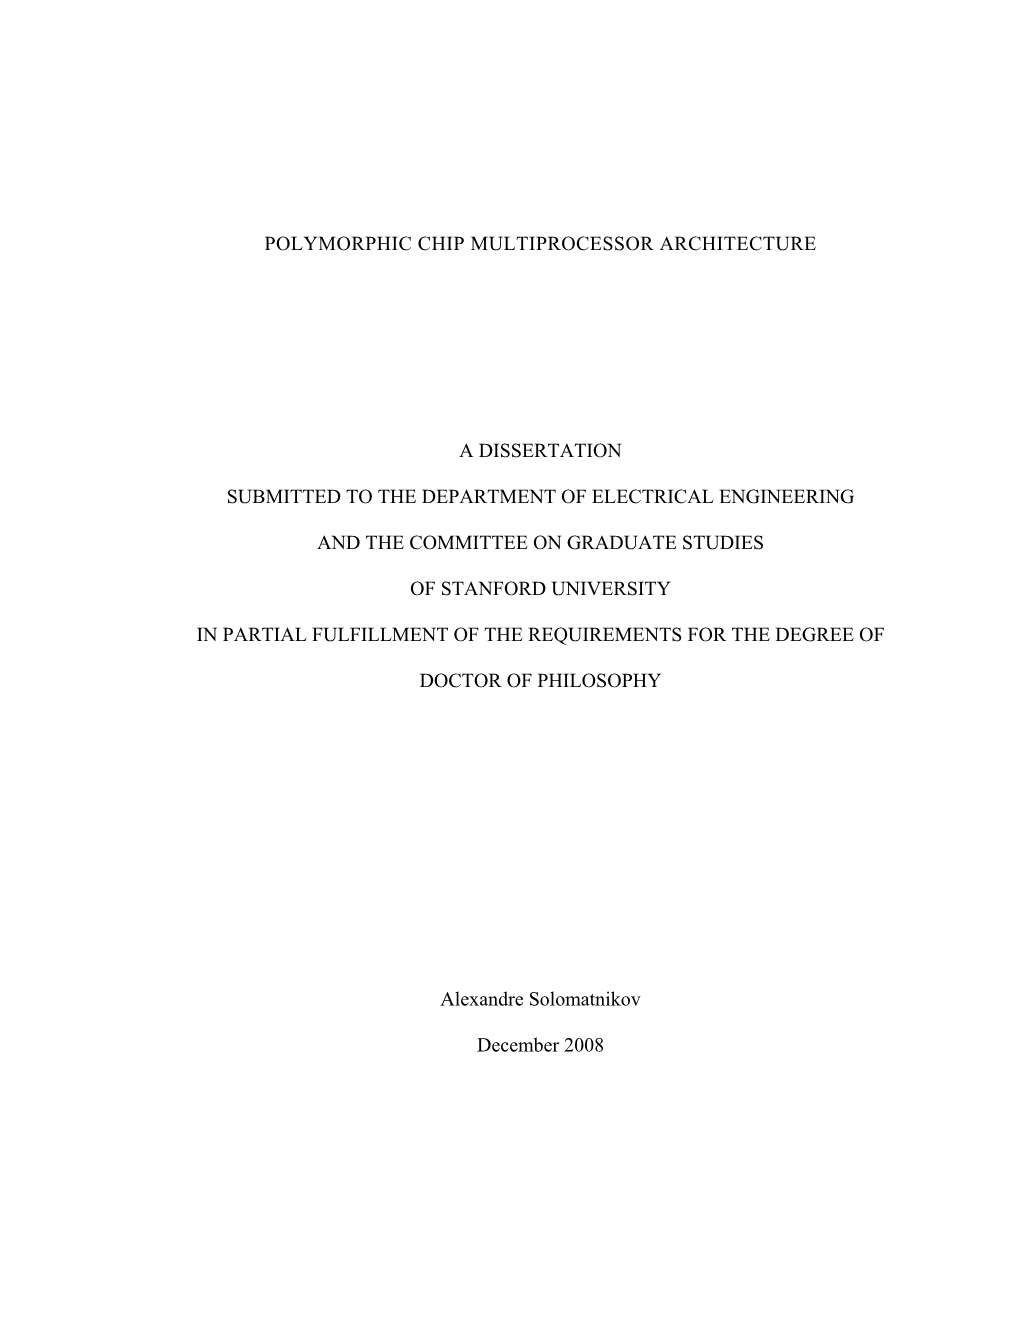 Polymorphic Chip Multiprocessor Architecture a Dissertation Submitted to the Department of Electrical Engineering and the Commit